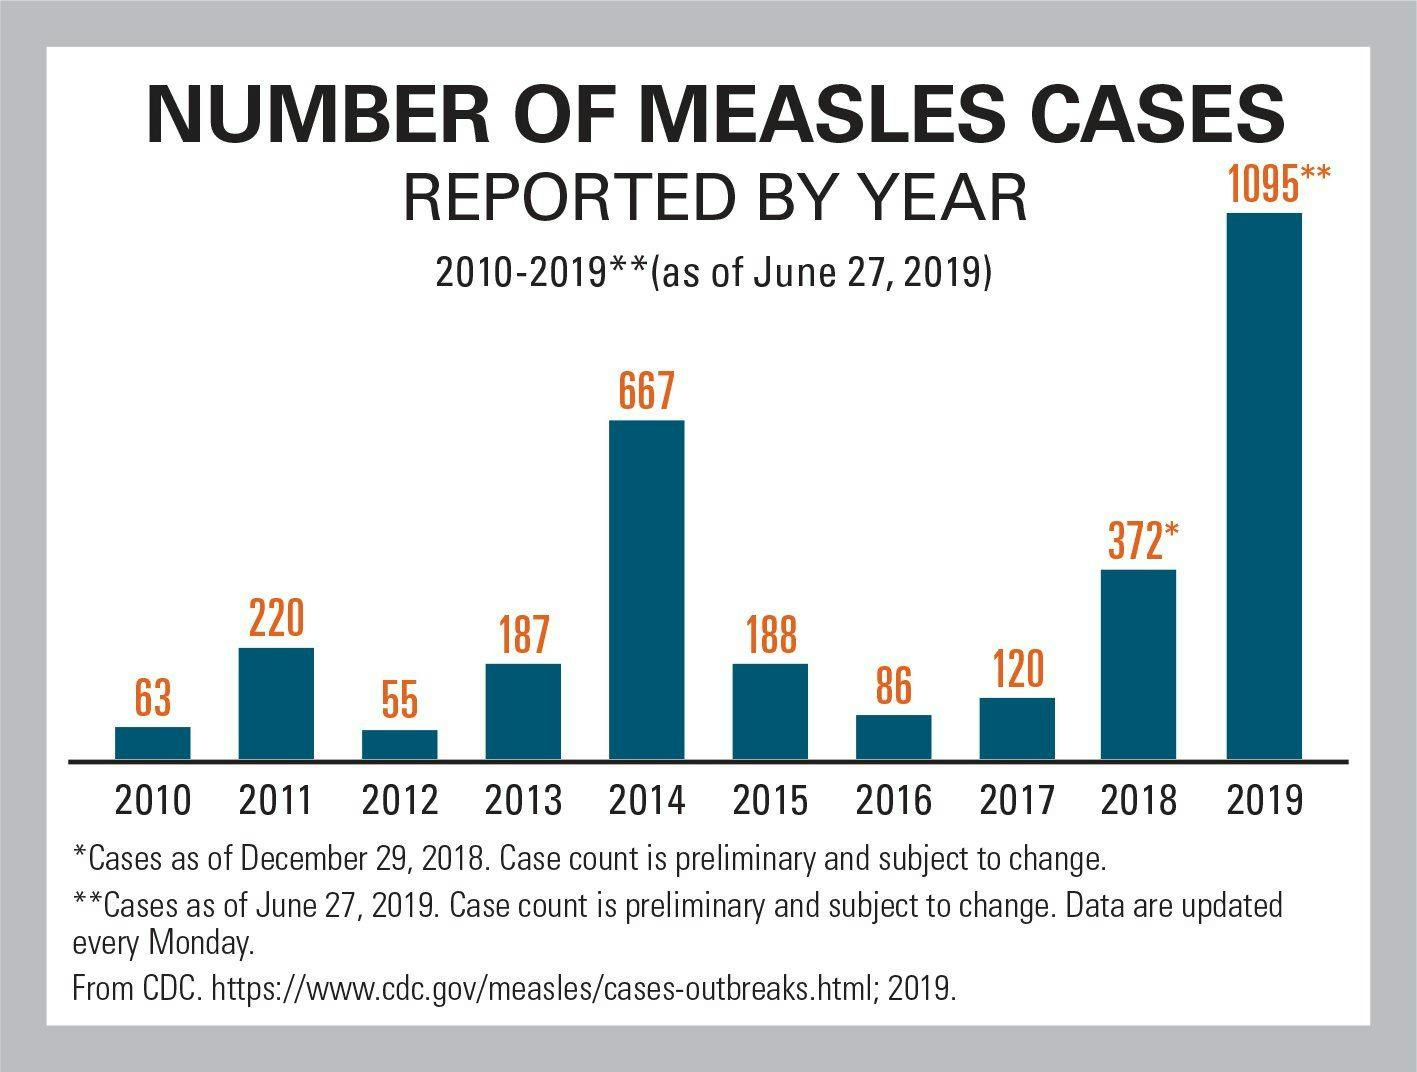 Number of measles cases reported by year